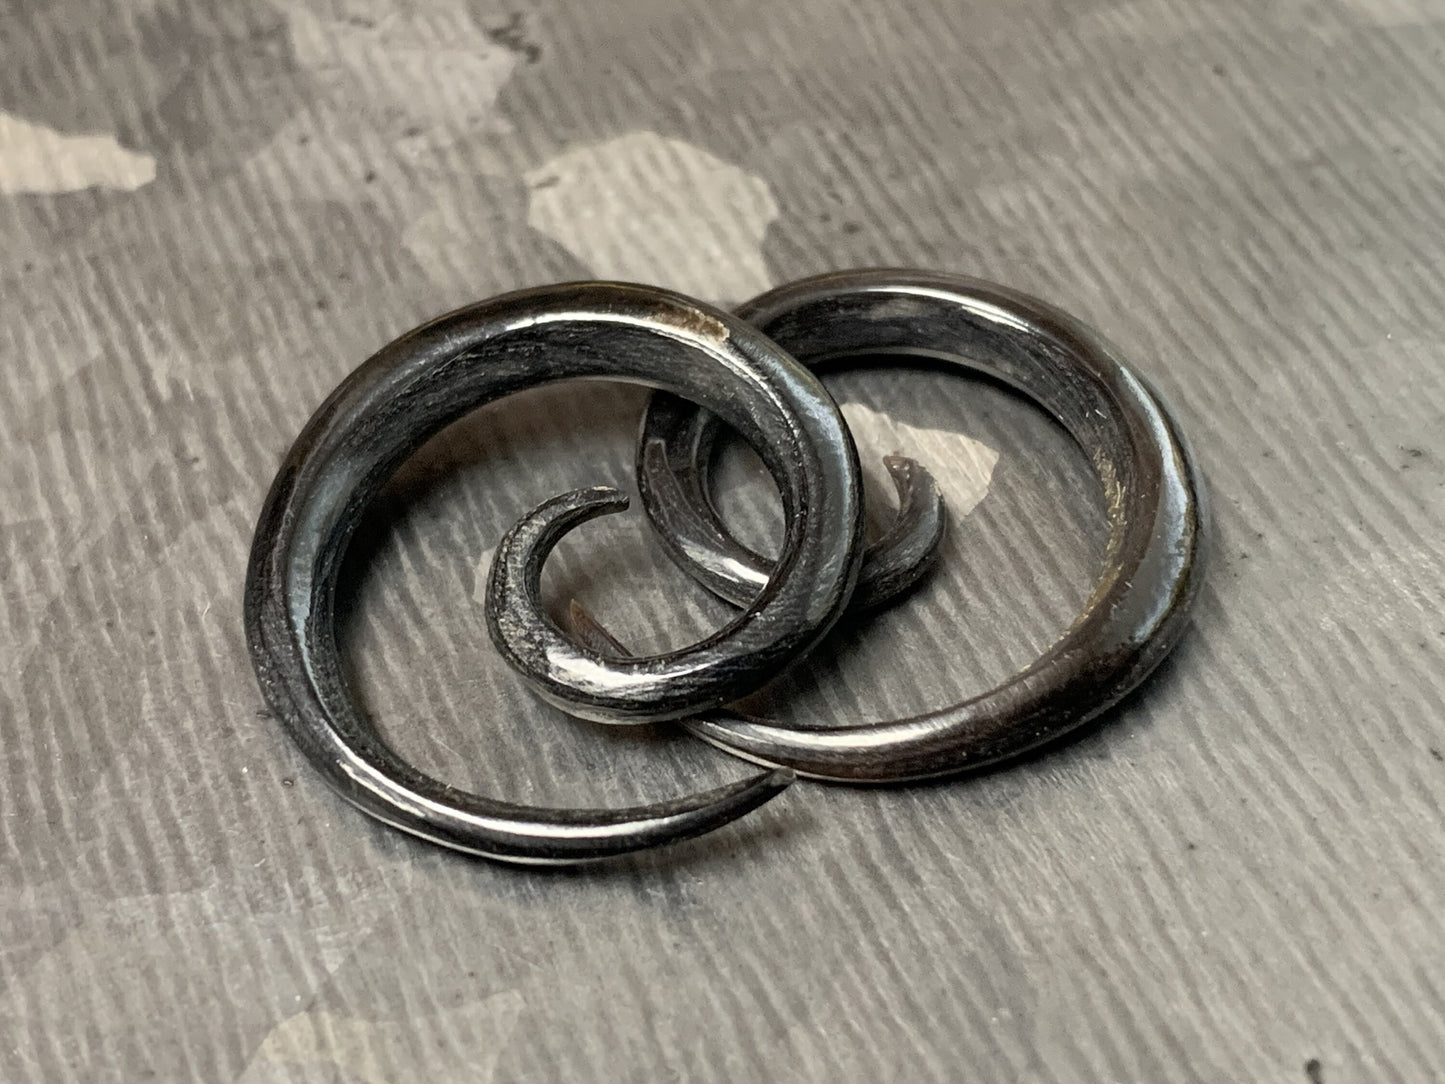 Pair of Original Spiral Organic Buffalo Horn Tapers/Plugs - Gauges 6g (4mm) up to 00g (10mm) available!